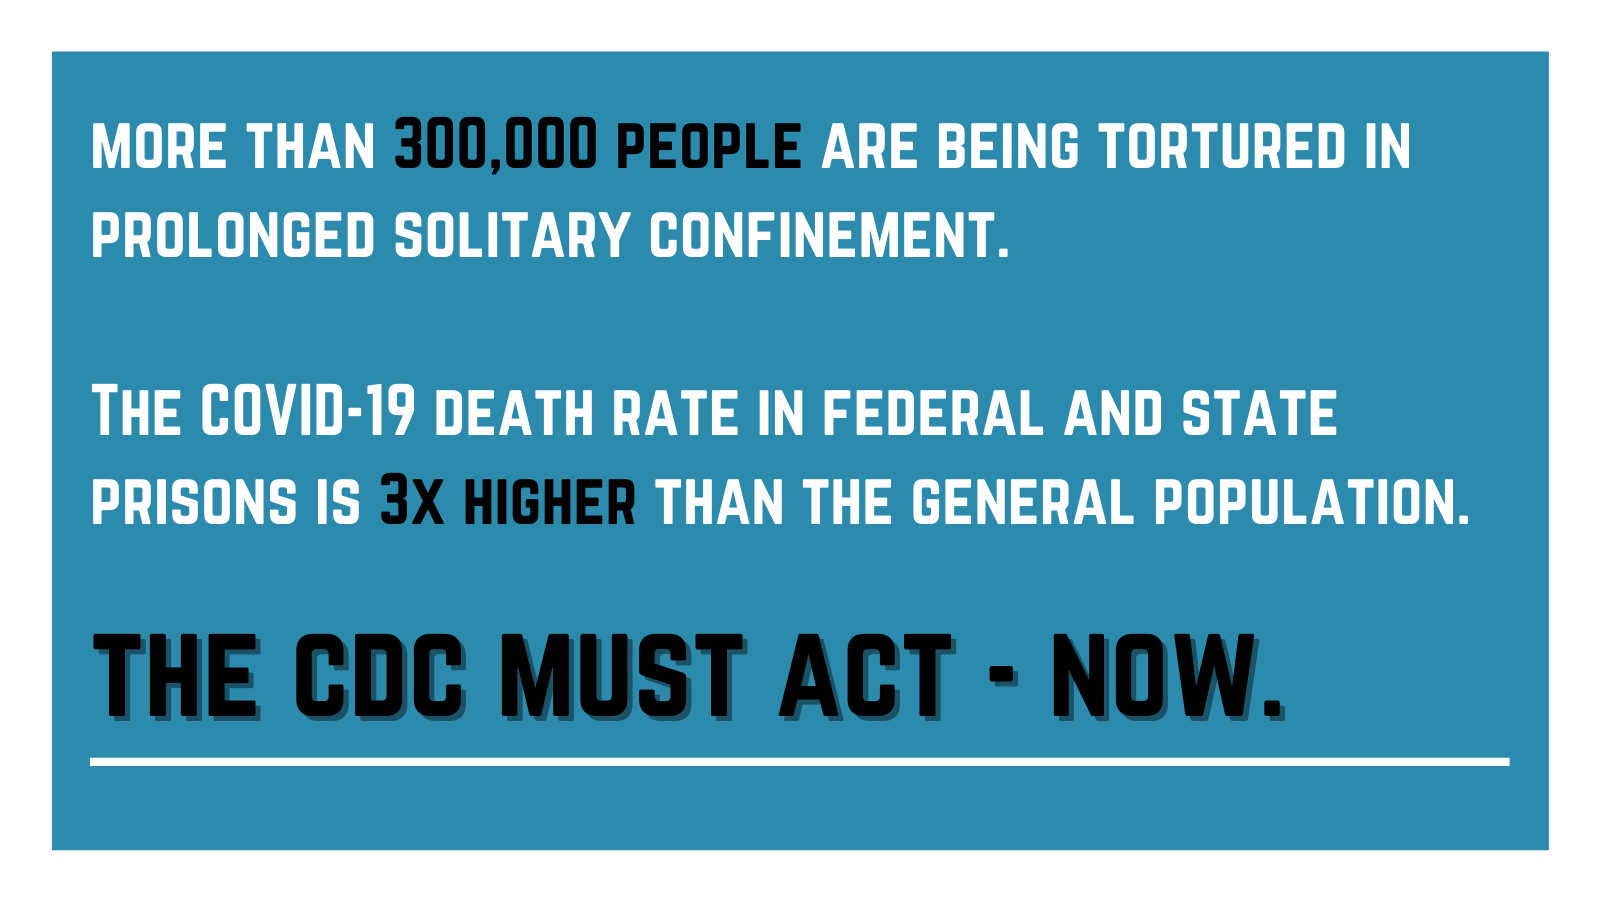 Graphic reading: More than 300,000 people are being tortured in prolonged solitary confinement. The COVID-19 death rate in federal and state prisons is 3x higher than the general population. The CDC must act – now.